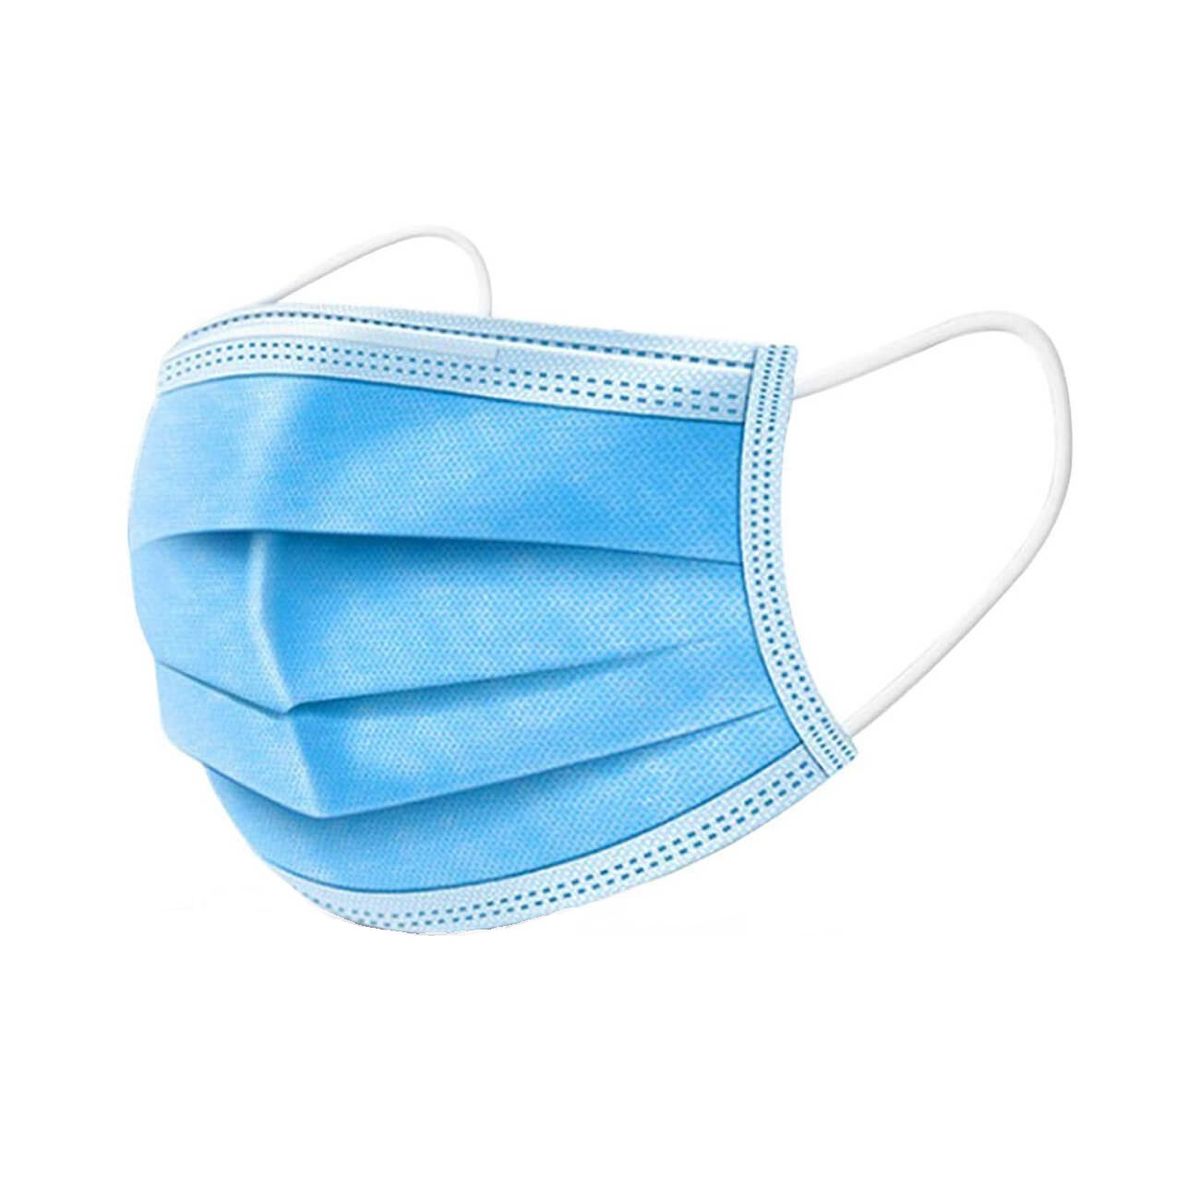 Starplus Face Masks 3 Ply Disposable Surgical Pack Of 2500 Shop Today Get It Tomorrow 